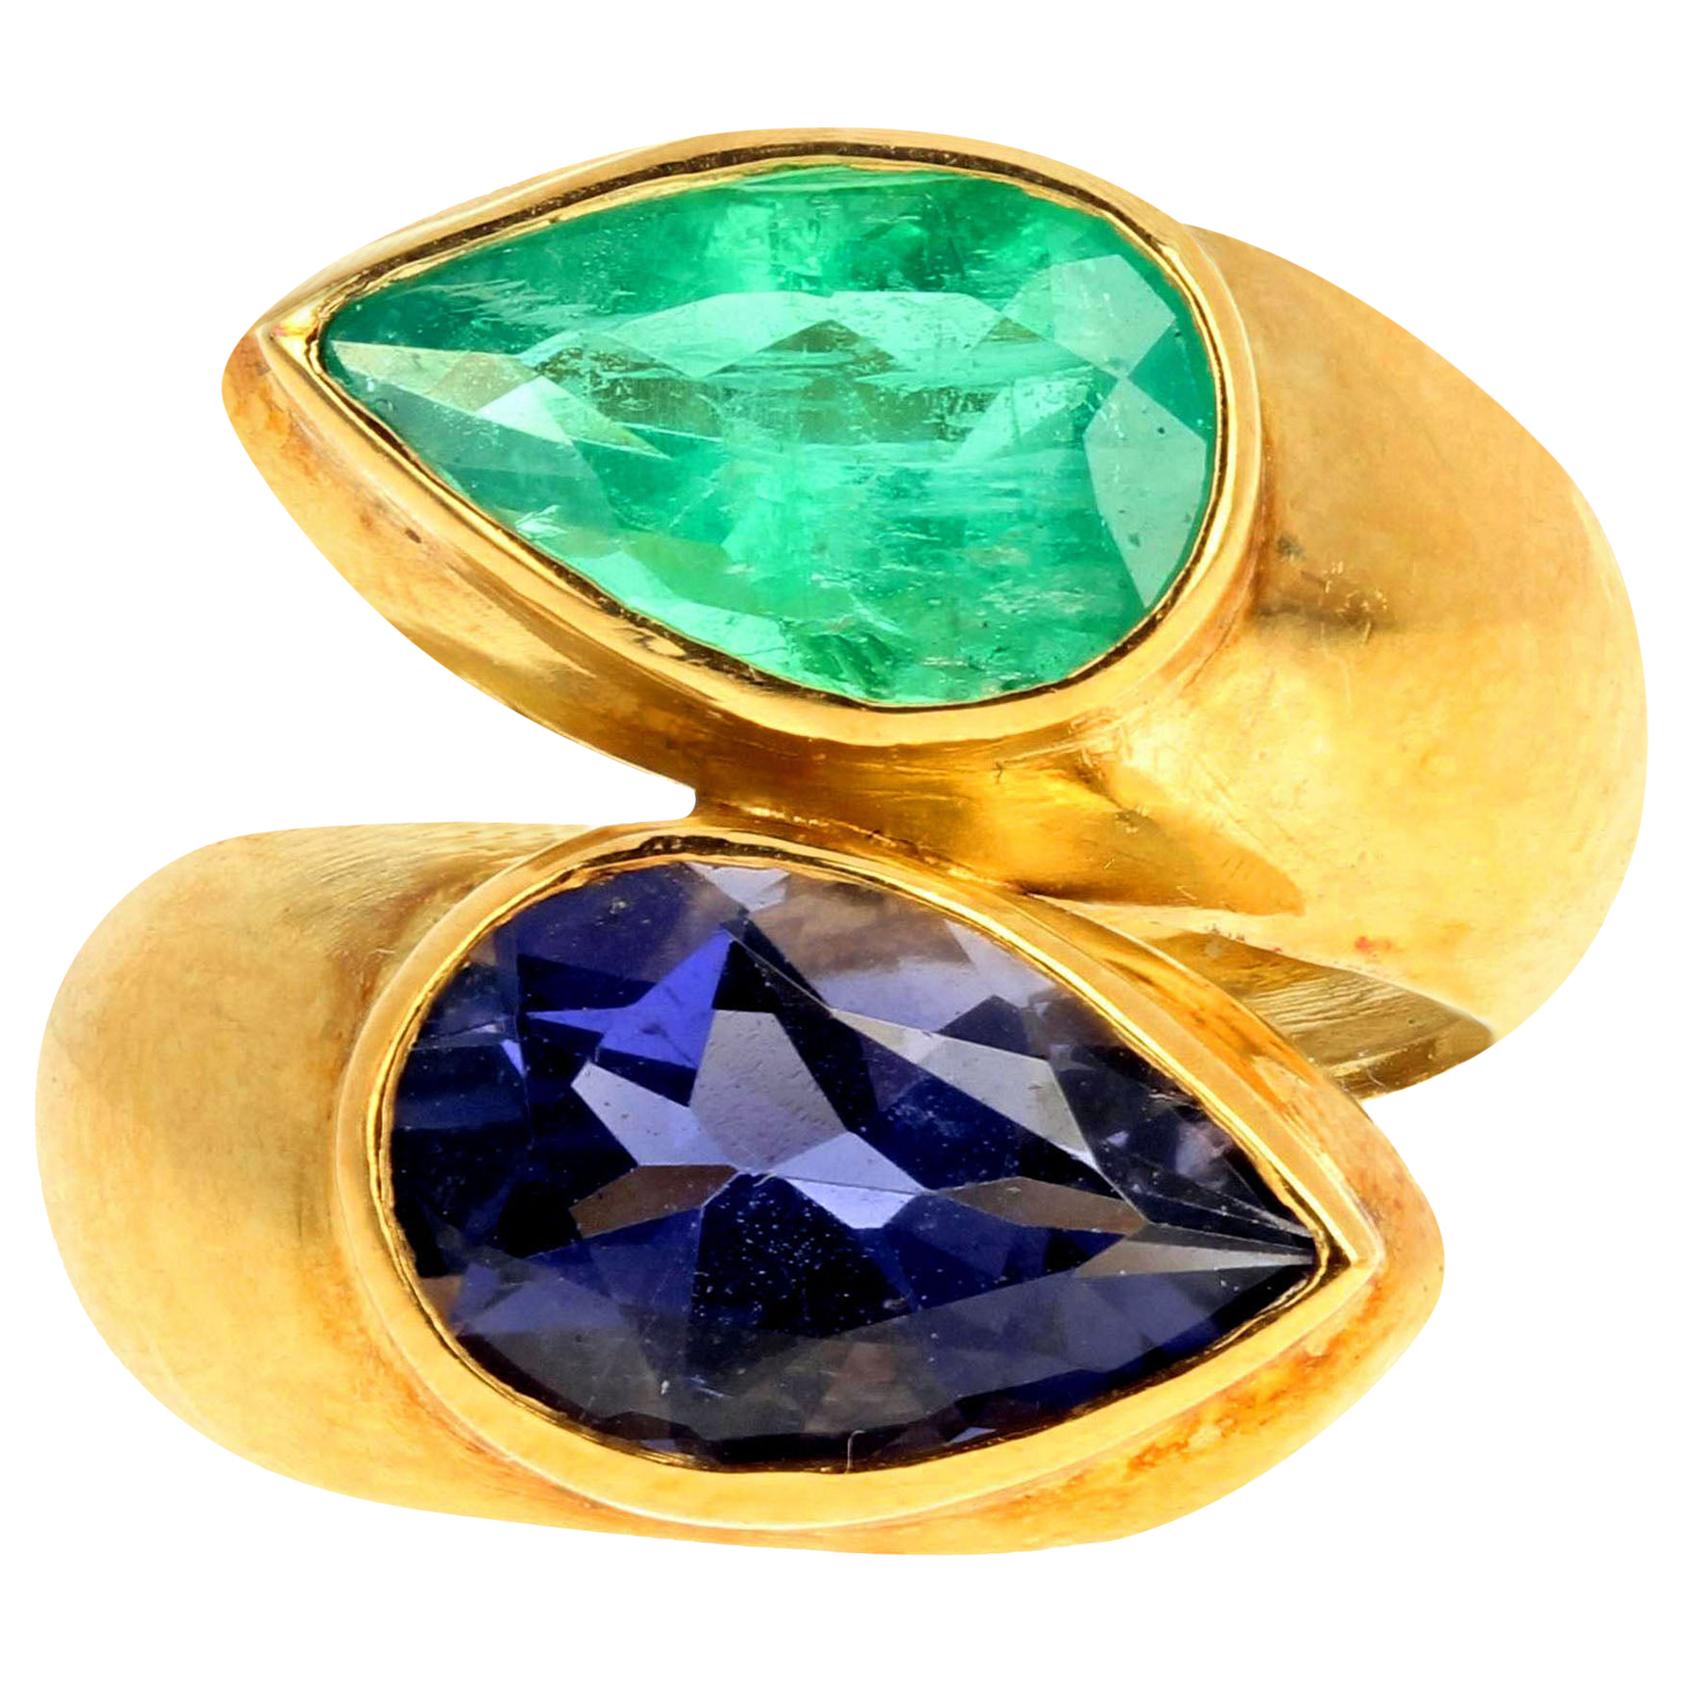 AJD Set of 2.3Ct Iolite & 2Ct Green Emerald Ring + 4.5Cts Emerald Earrings